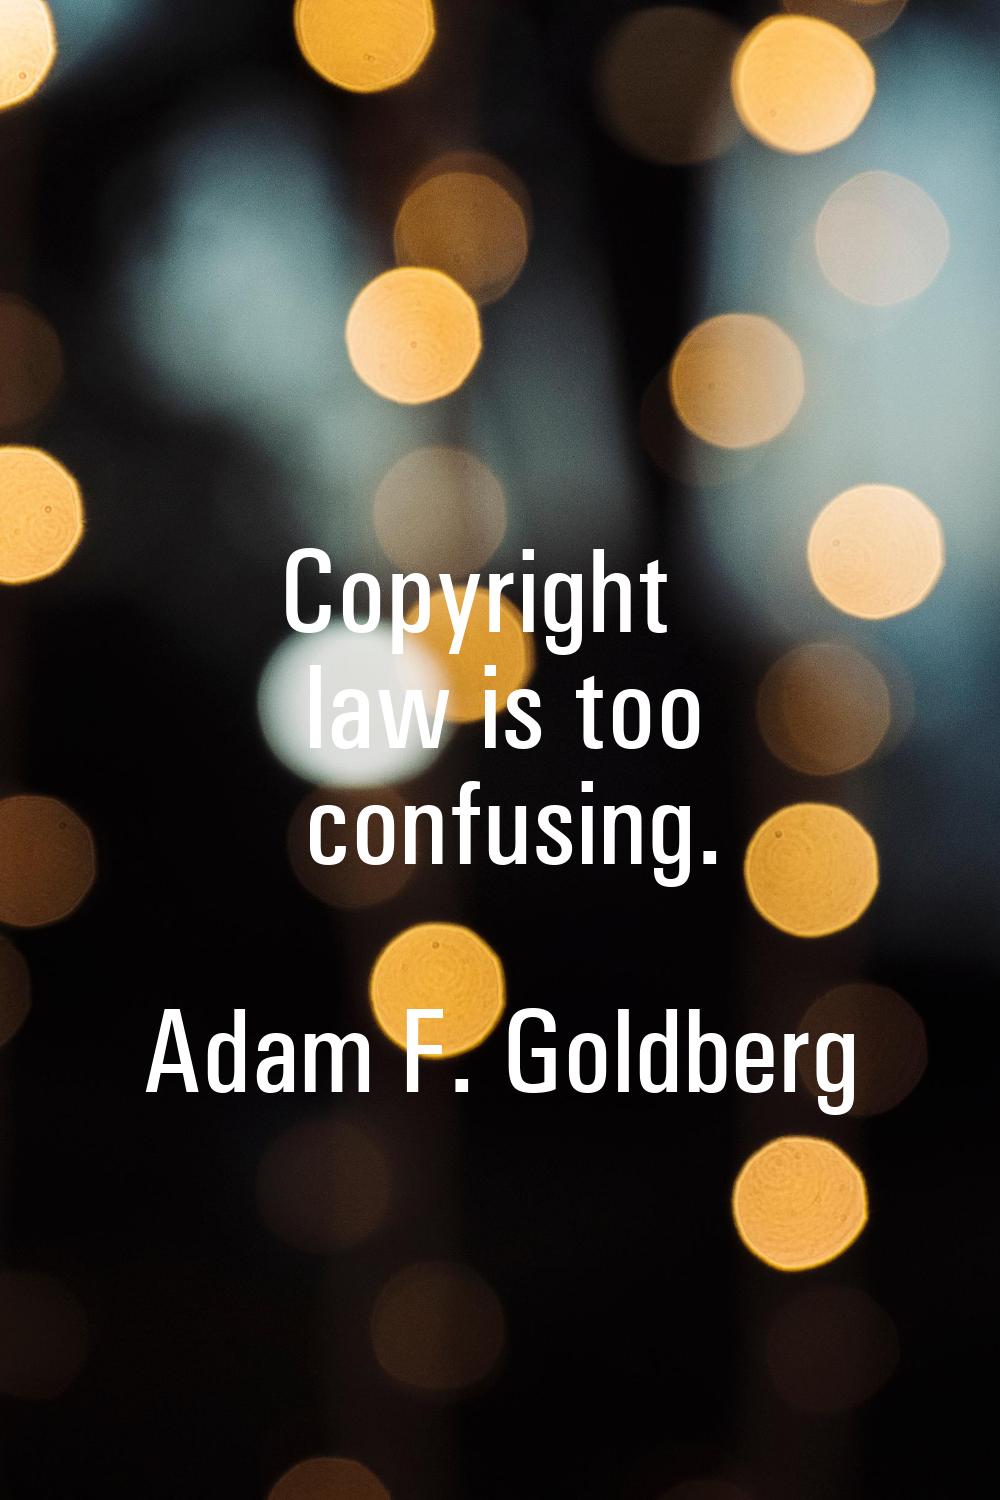 Copyright law is too confusing.